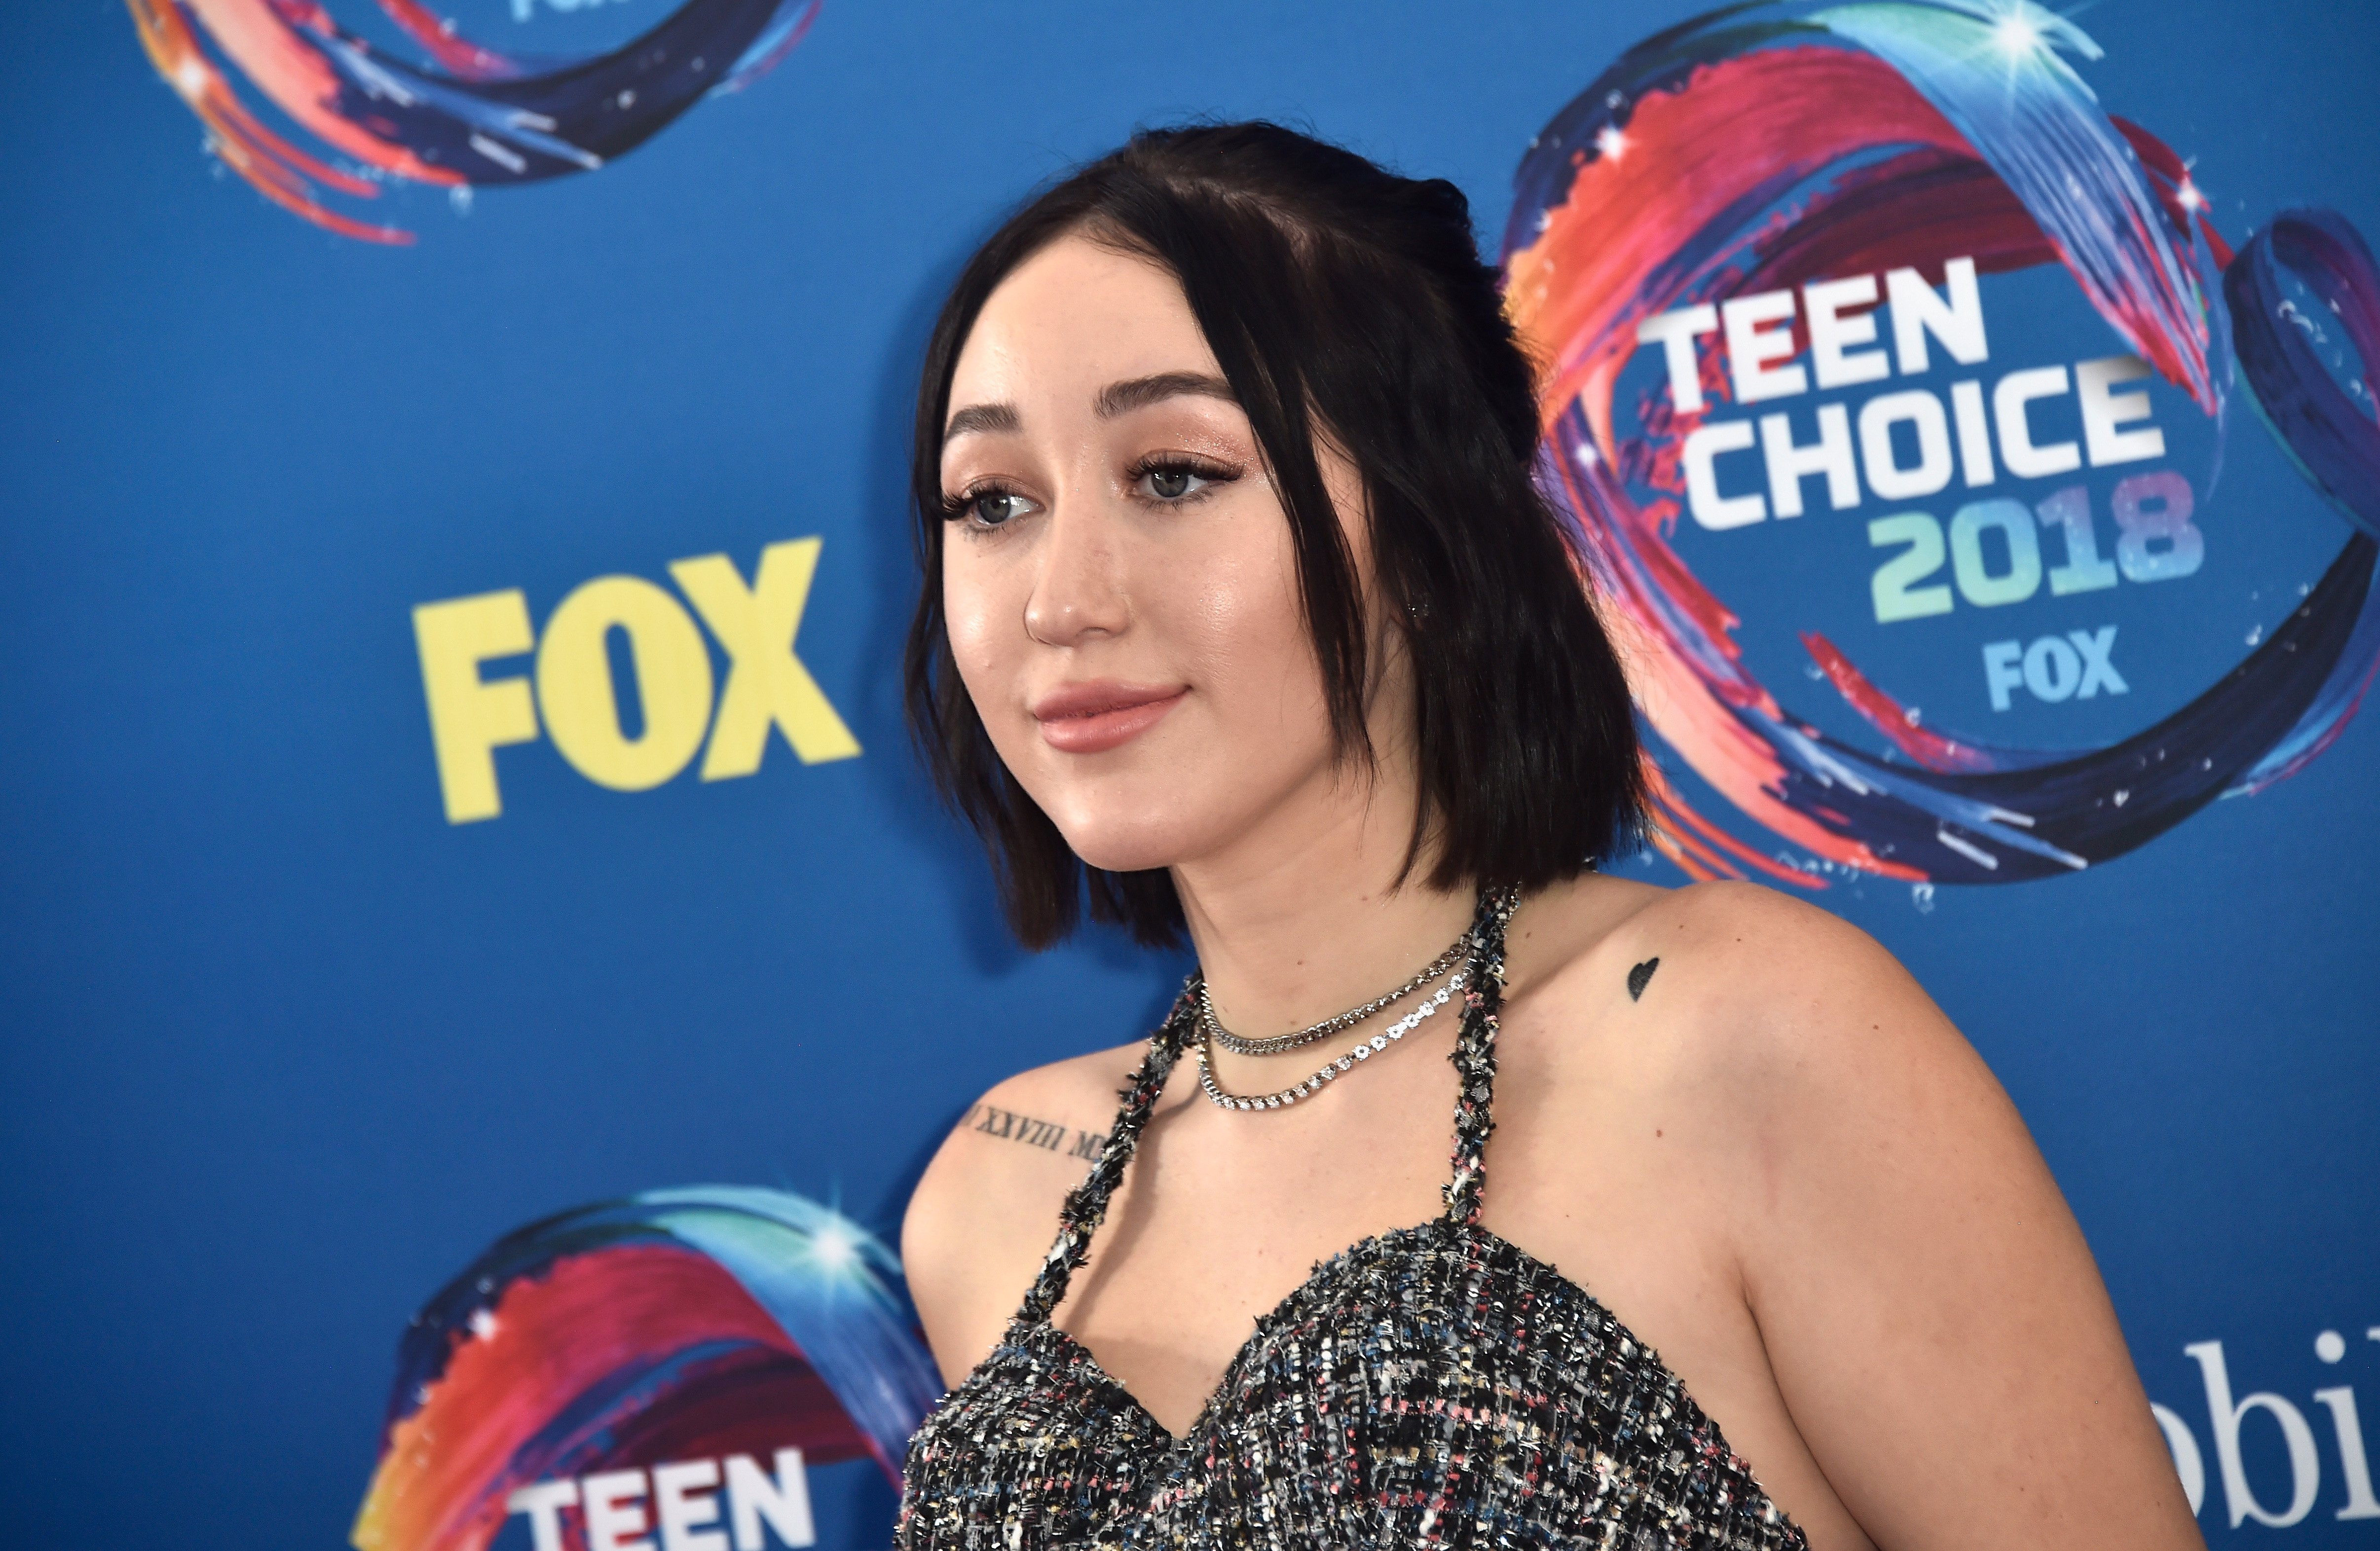 Noah Cyrus at the FOX's Teen Choice Awards at The Forum in Inglewood, California | Photo: Frazer Harrison/Getty Images